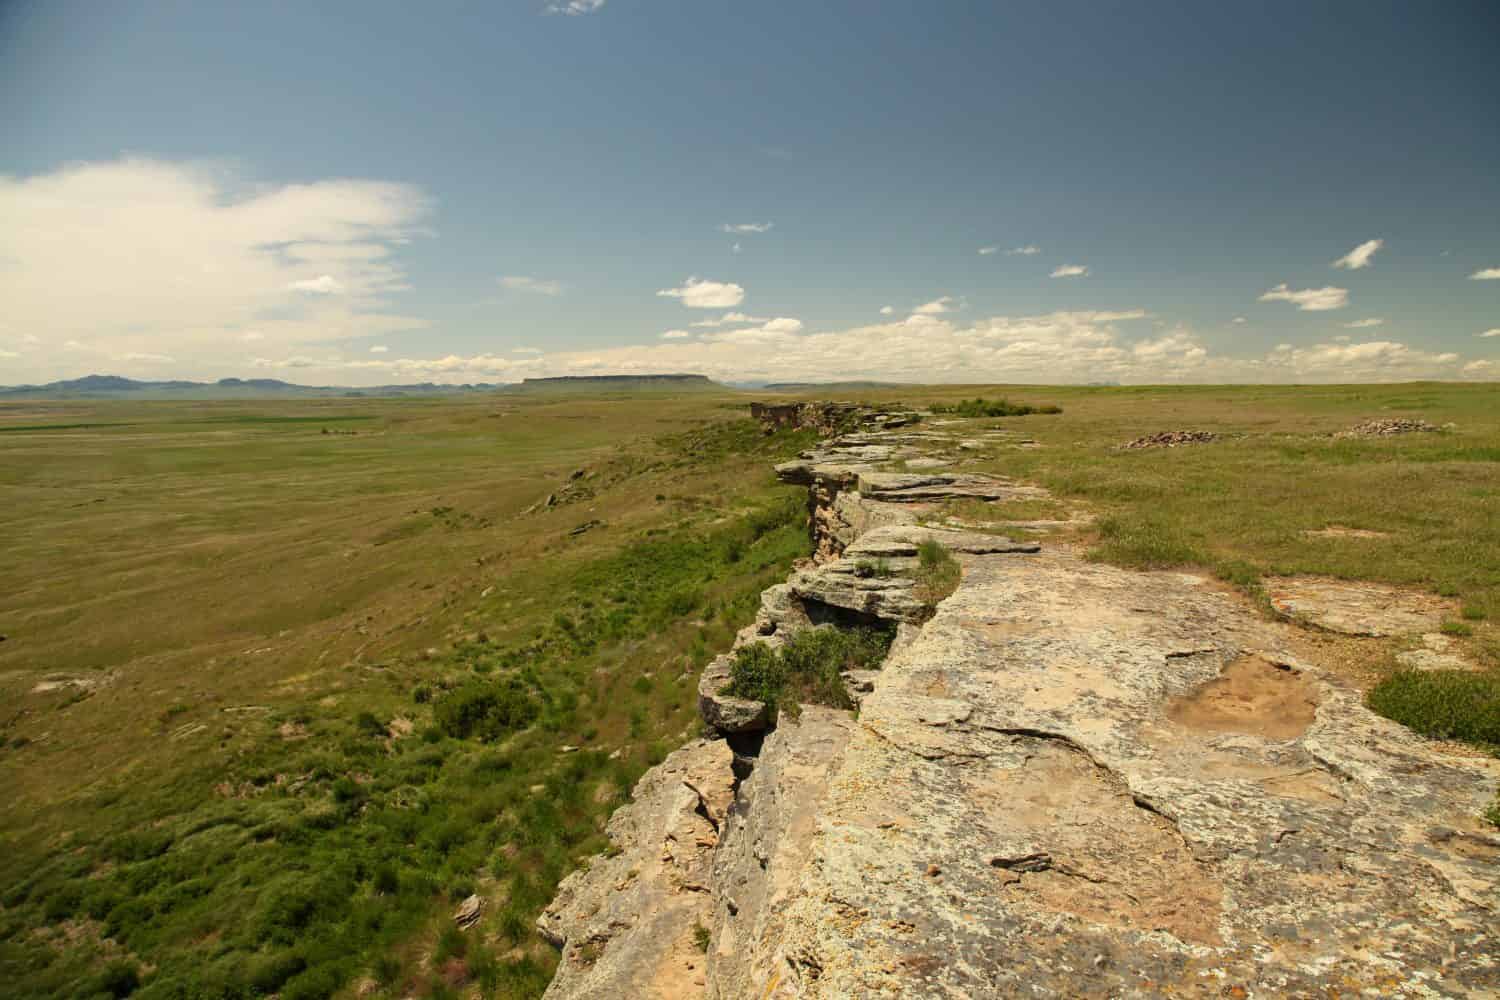 The buffalo jump hill at First Peoples Buffalo Jump State Park in Montana